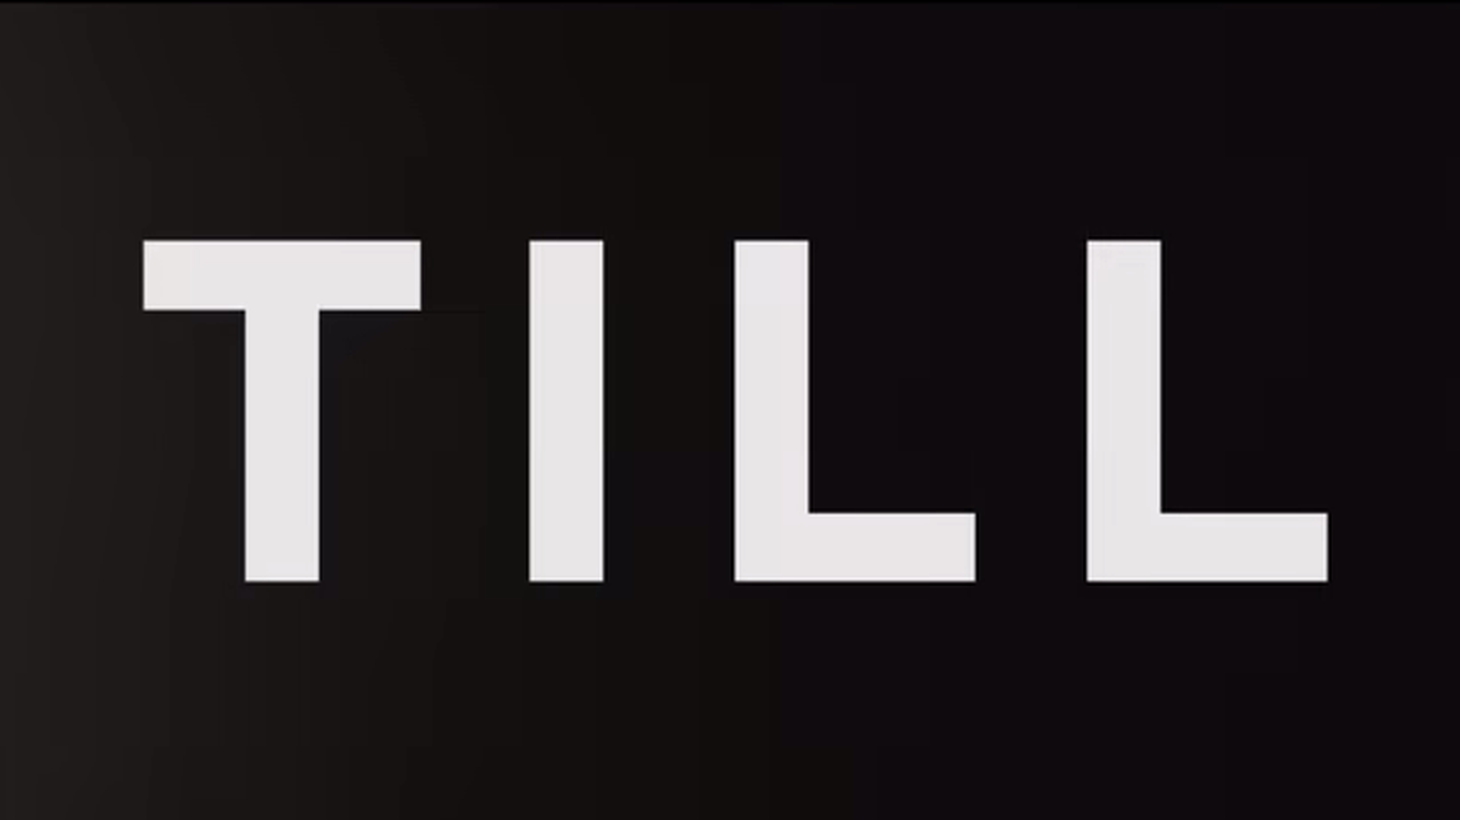 “Till” is based on the true story of Mamie Till, whose son Emmett Till was brutally lynched by white supremacists in 1955.